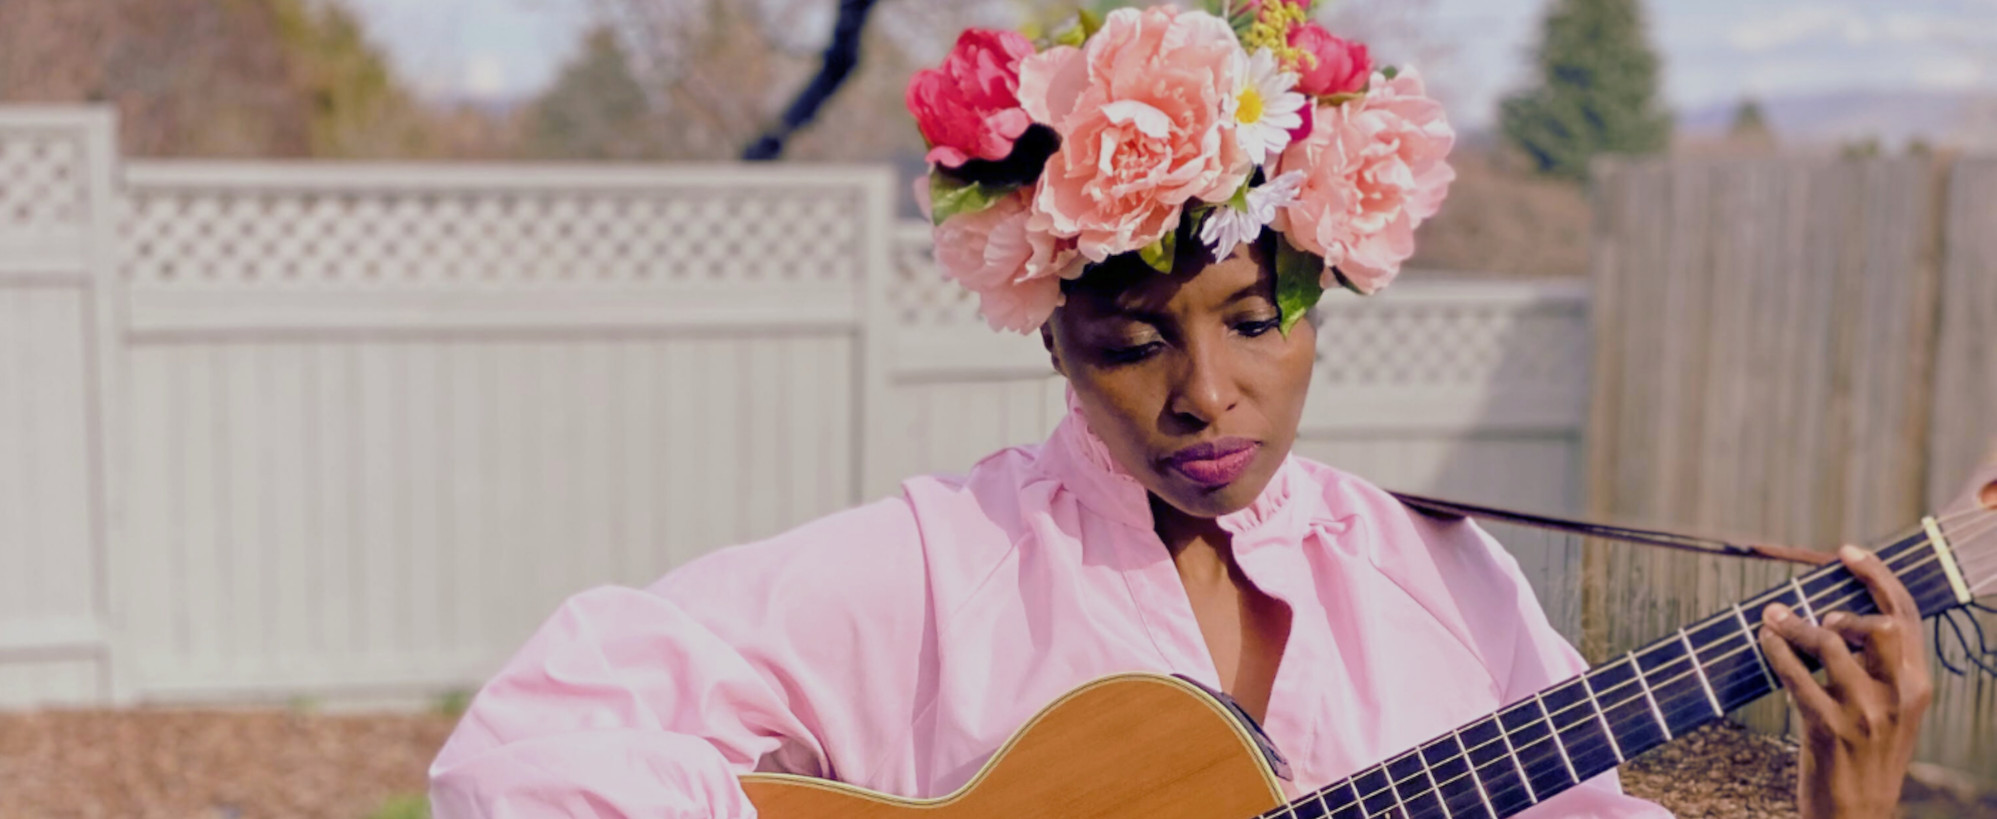 Exclusive Premiere: The Maternal “Sometimes I Worry” by Naomi Wachira